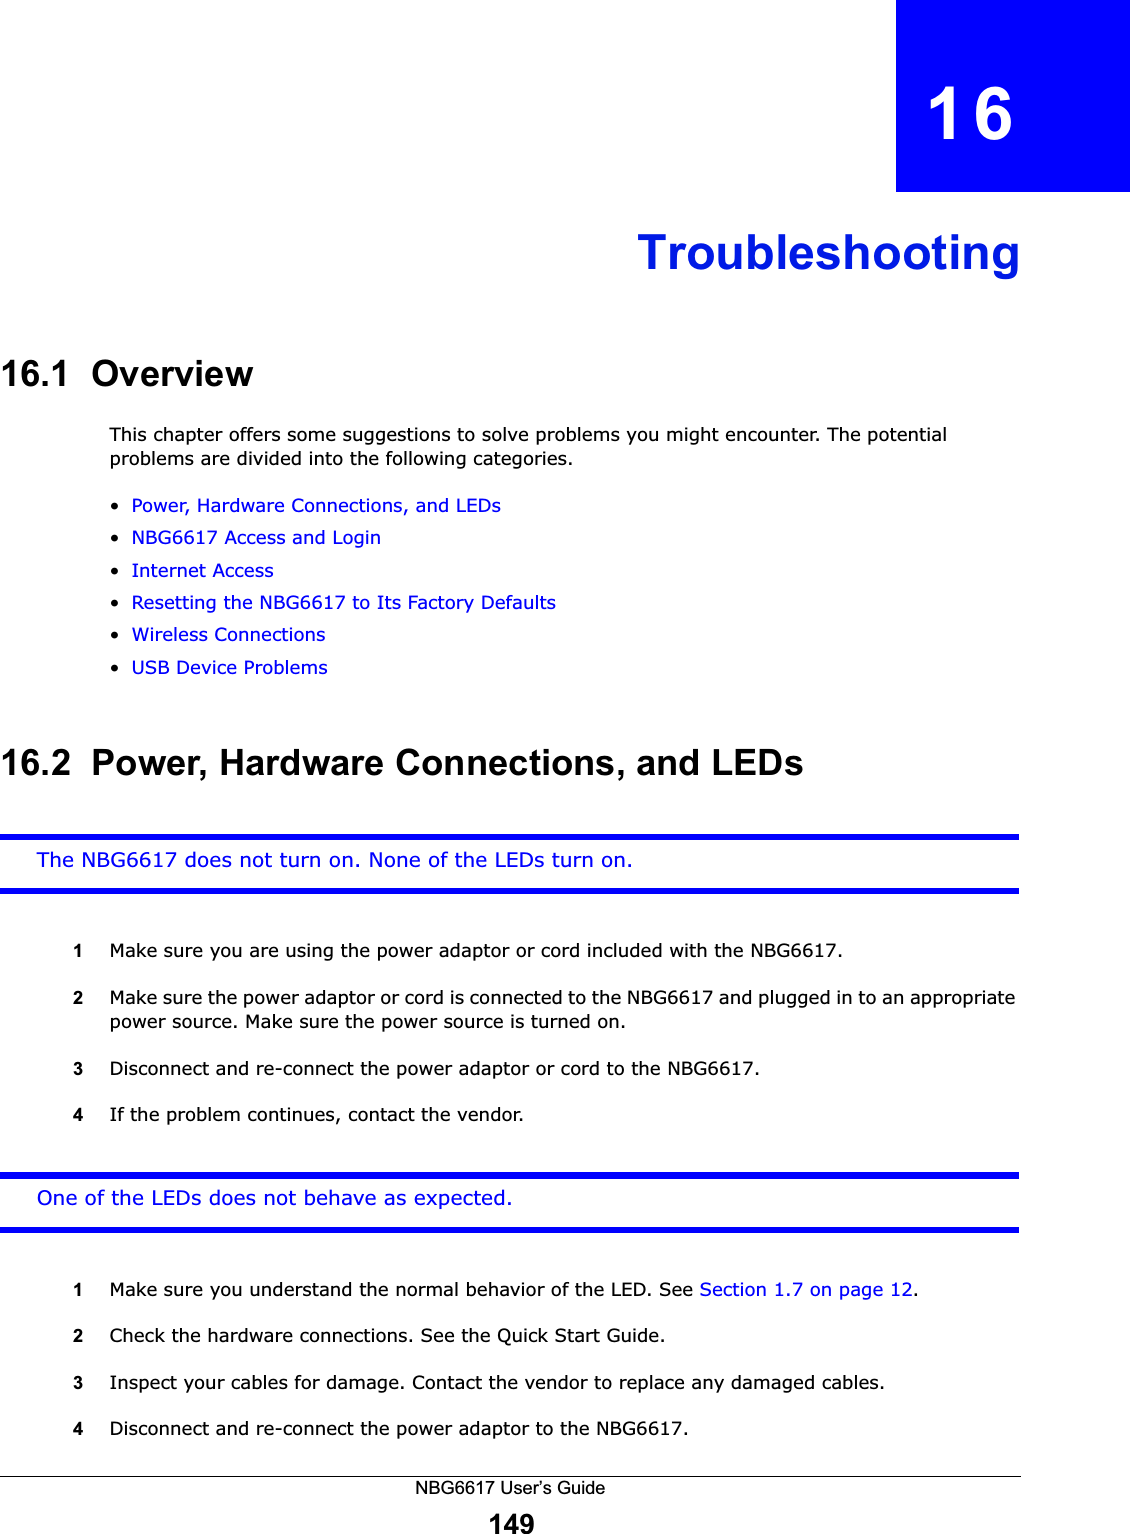 NBG6617 User’s Guide149CHAPTER   16Troubleshooting16.1  OverviewThis chapter offers some suggestions to solve problems you might encounter. The potential problems are divided into the following categories. •Power, Hardware Connections, and LEDs•NBG6617 Access and Login•Internet Access•Resetting the NBG6617 to Its Factory Defaults•Wireless Connections•USB Device Problems16.2  Power, Hardware Connections, and LEDsThe NBG6617 does not turn on. None of the LEDs turn on.1Make sure you are using the power adaptor or cord included with the NBG6617.2Make sure the power adaptor or cord is connected to the NBG6617 and plugged in to an appropriate power source. Make sure the power source is turned on.3Disconnect and re-connect the power adaptor or cord to the NBG6617.4If the problem continues, contact the vendor.One of the LEDs does not behave as expected.1Make sure you understand the normal behavior of the LED. See Section 1.7 on page 12.2Check the hardware connections. See the Quick Start Guide. 3Inspect your cables for damage. Contact the vendor to replace any damaged cables.4Disconnect and re-connect the power adaptor to the NBG6617. 